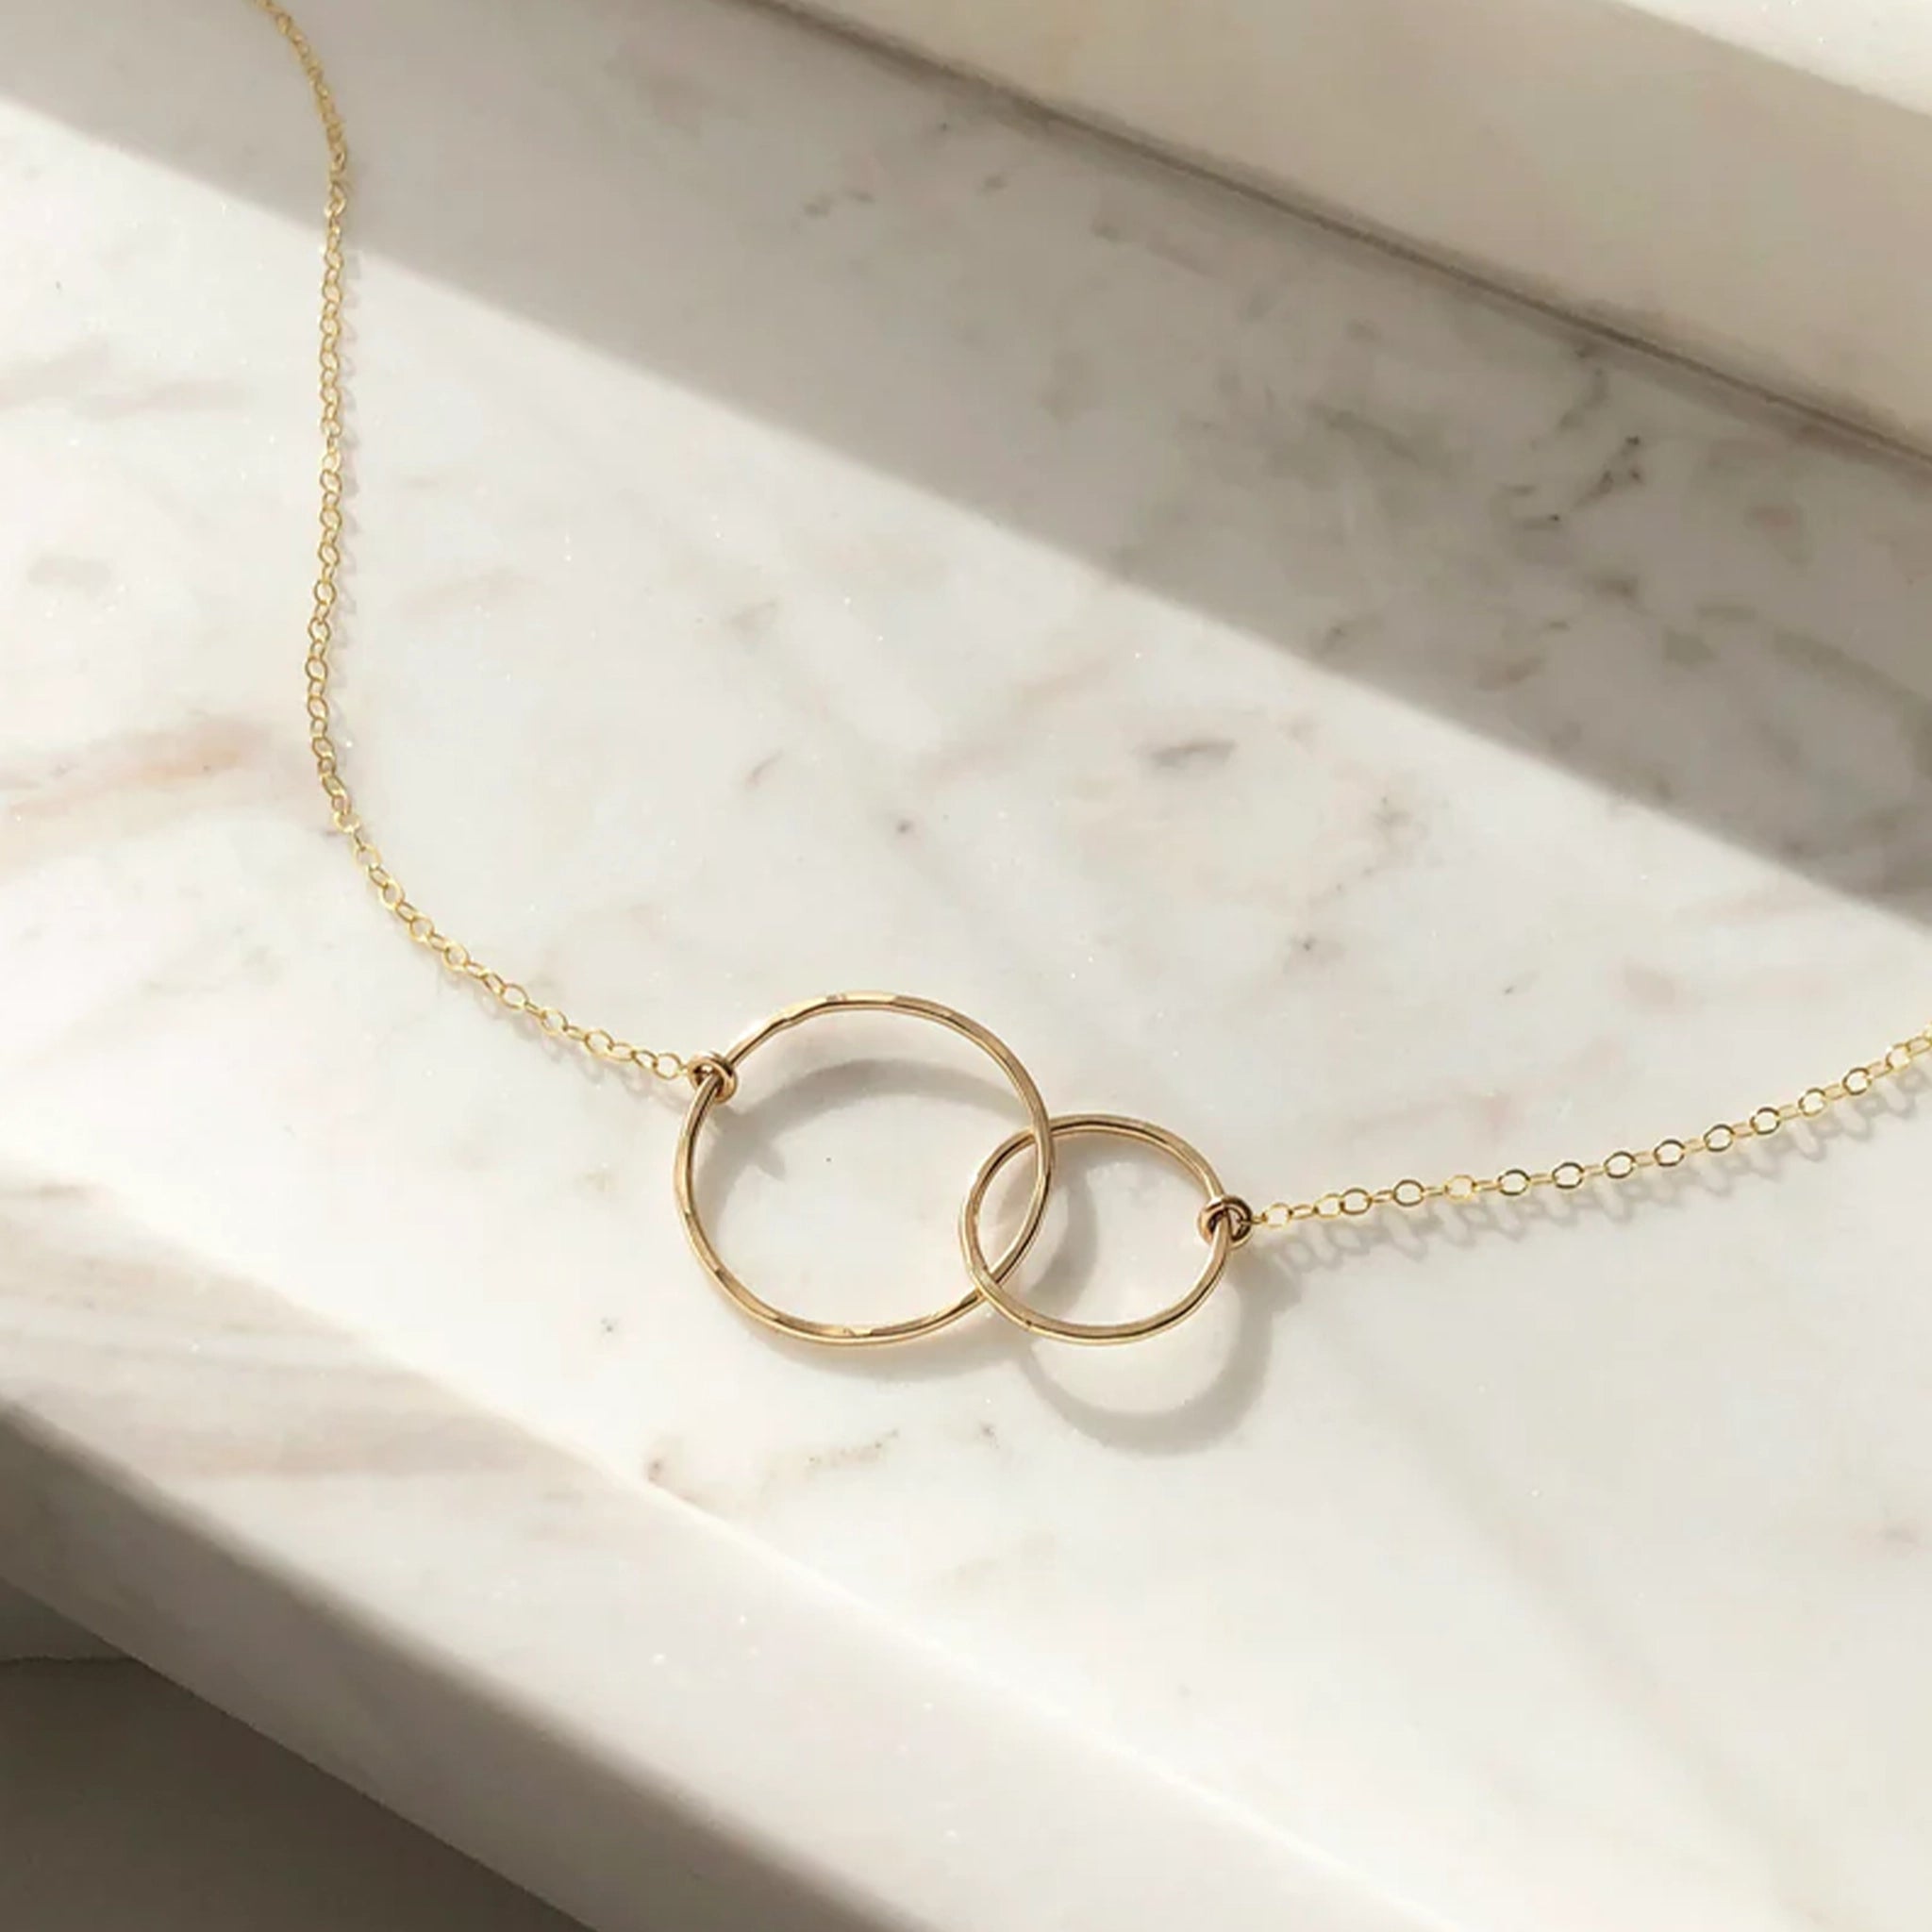 the unity necklace features two gold circles, hand forged and lightly hammered that come together and hang from a beautiful chain.